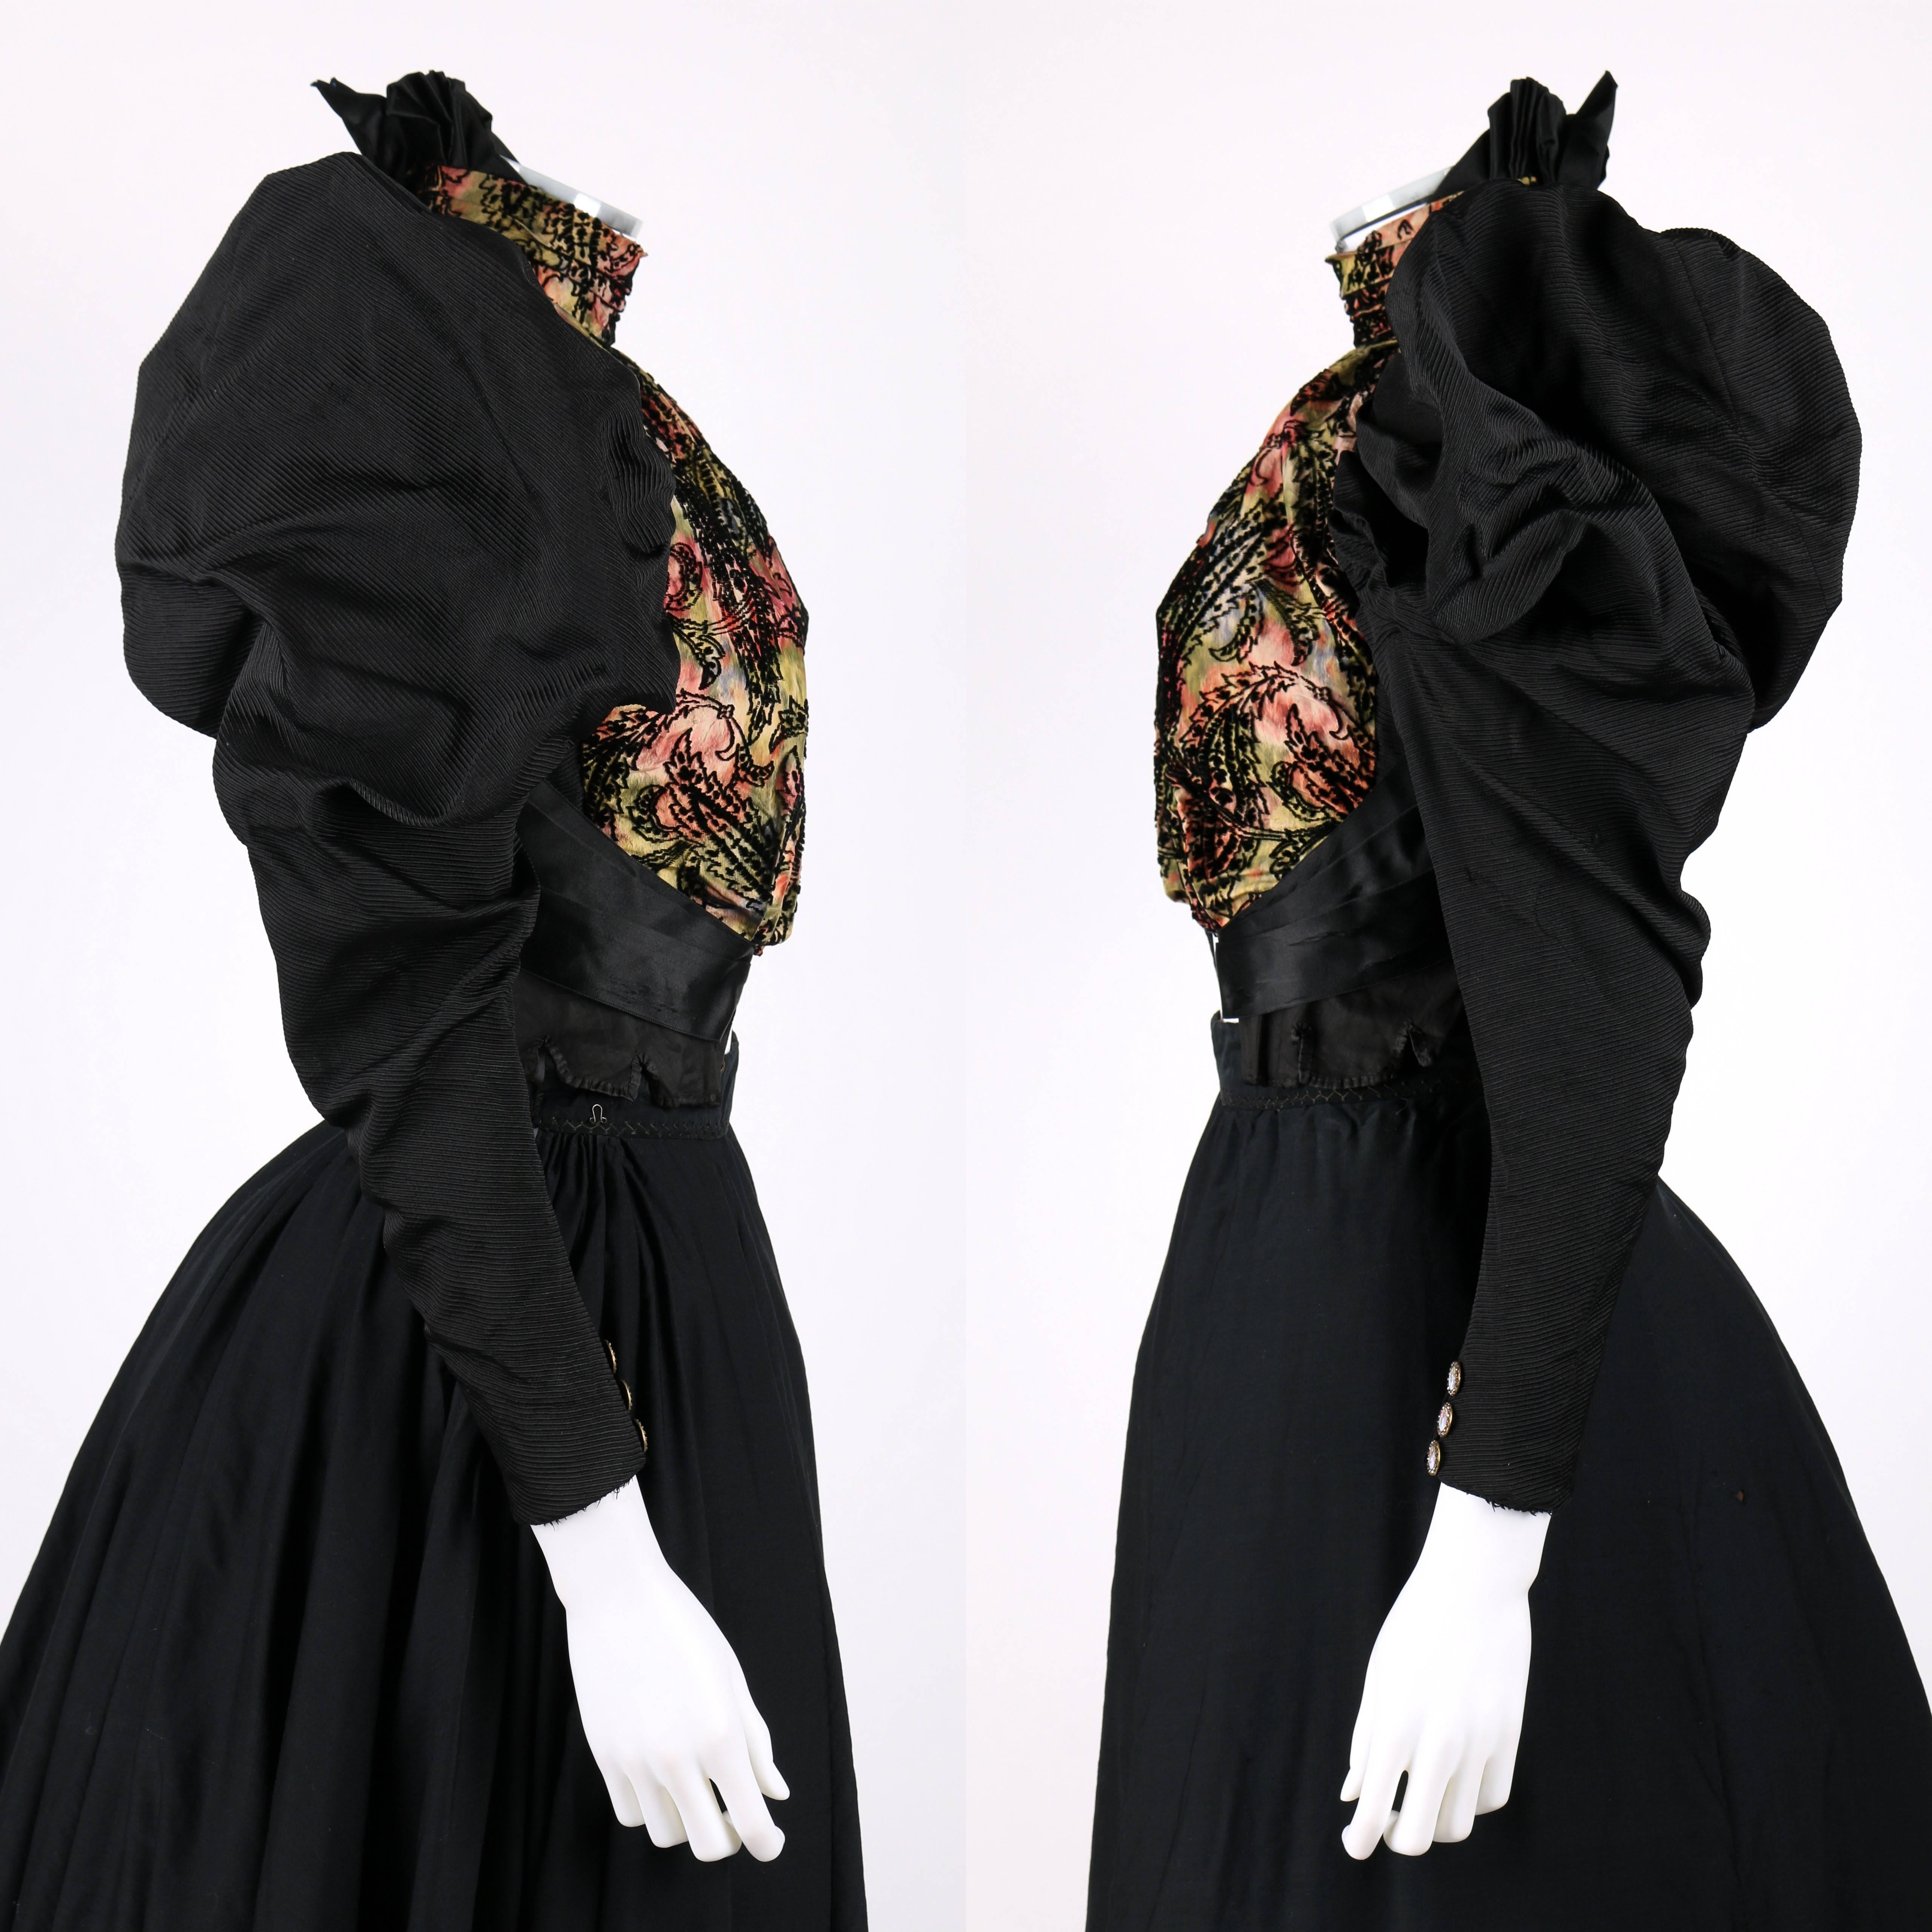 1890s clothing for sale